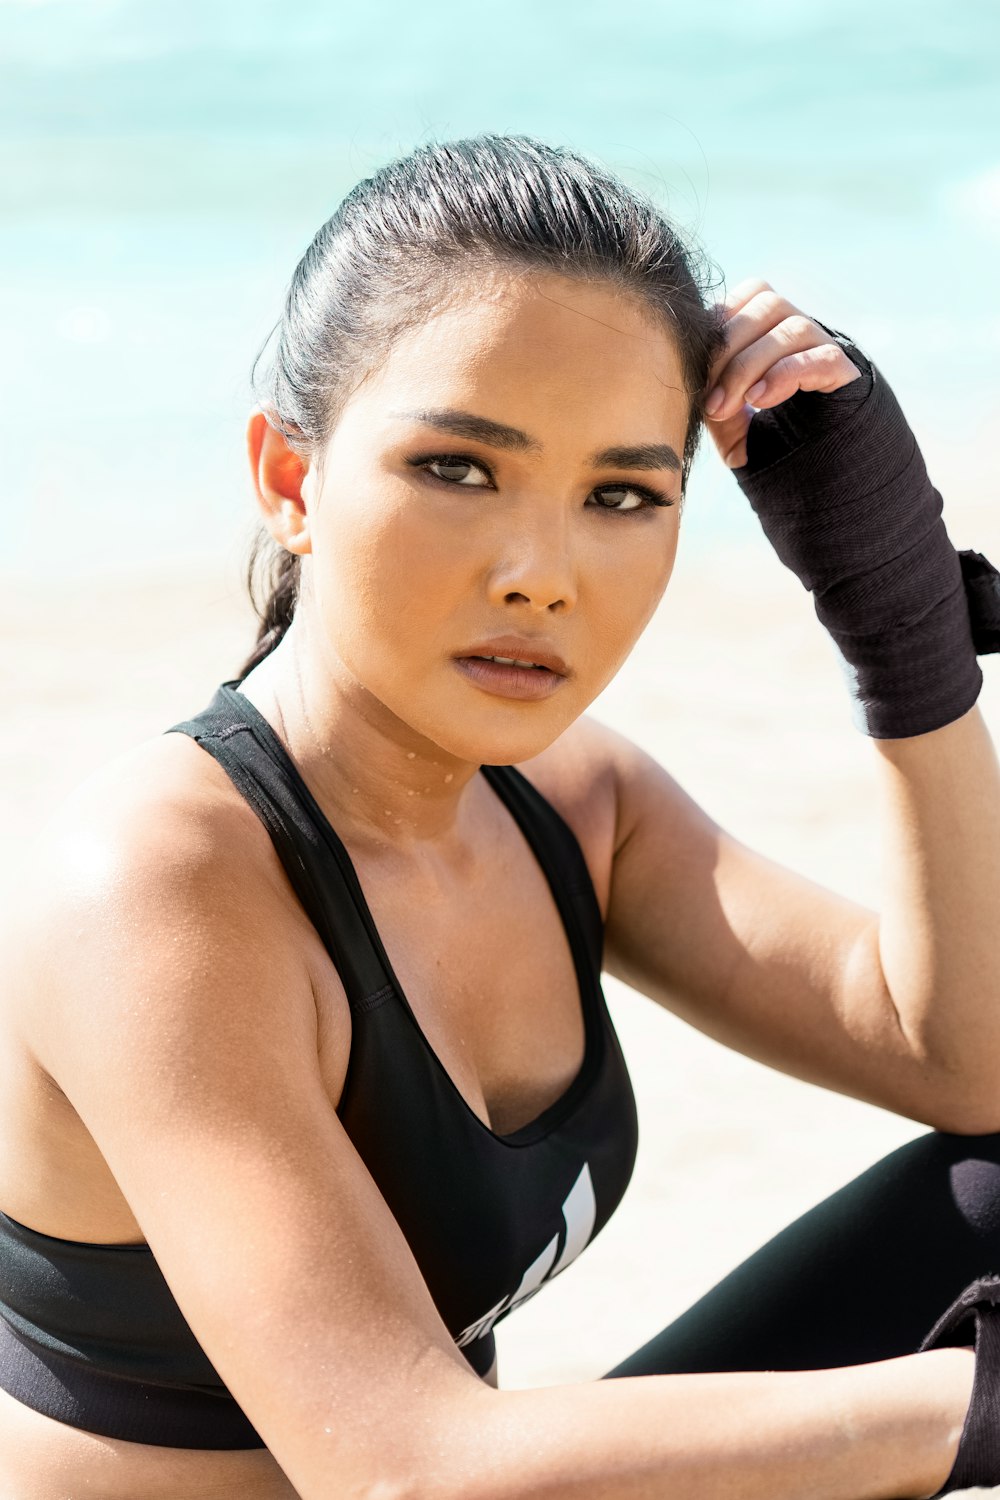 Sexy Asian Woman Pictures | Download Free Images on Unsplash